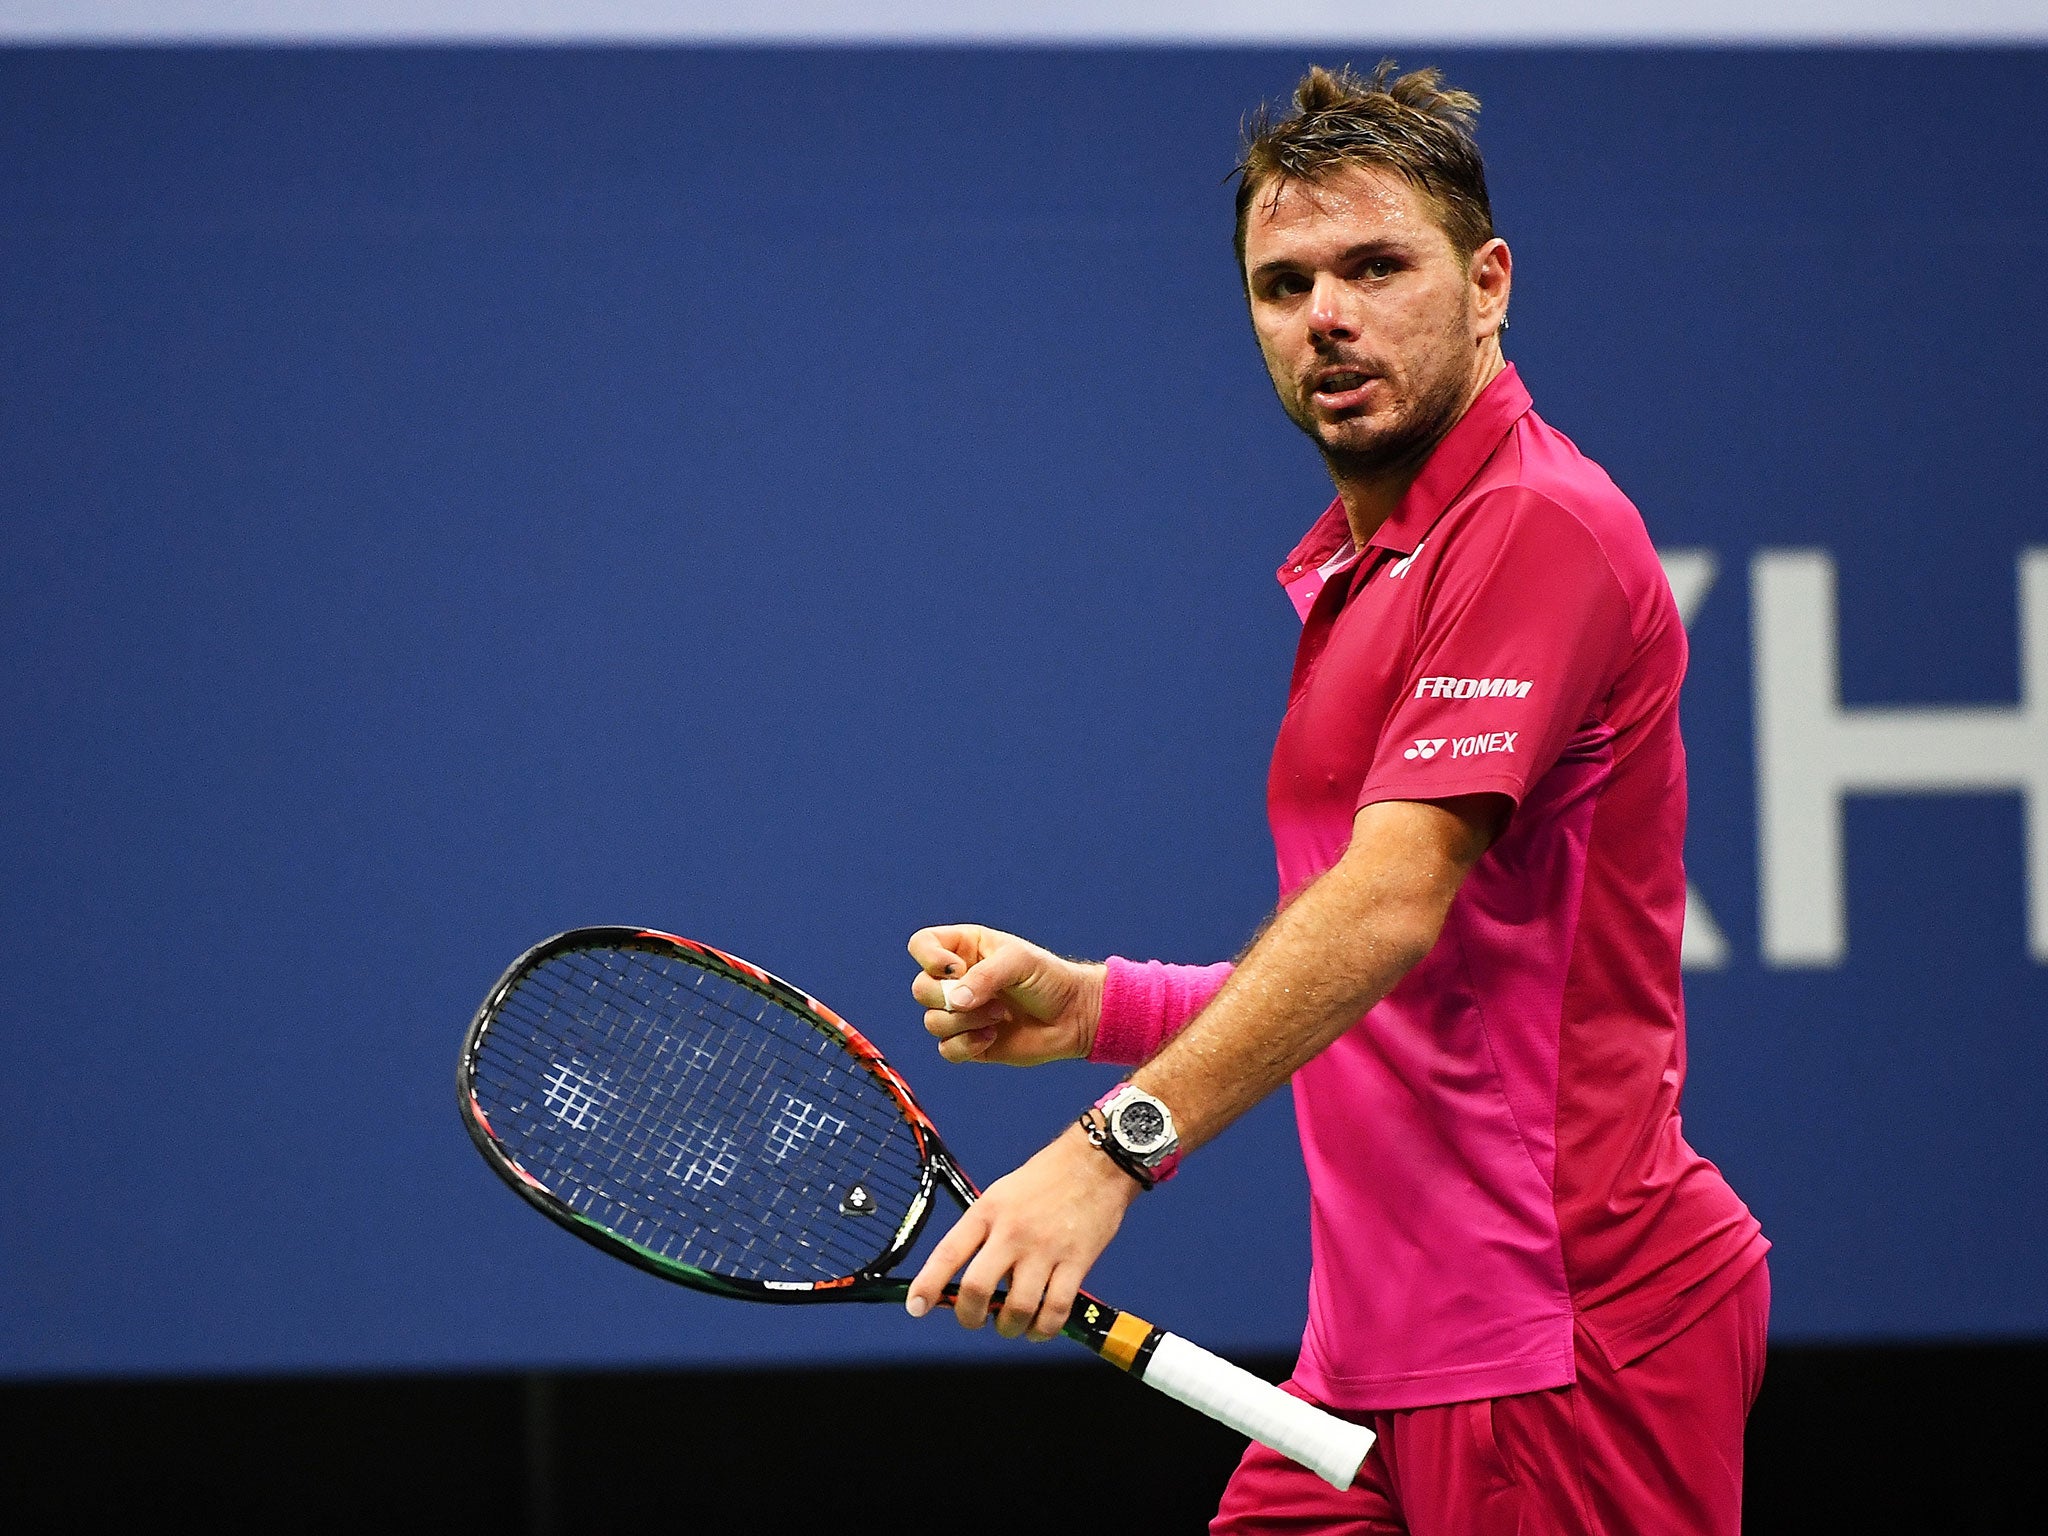 &#13;
Wawrinka proved too much for Del Potro &#13;